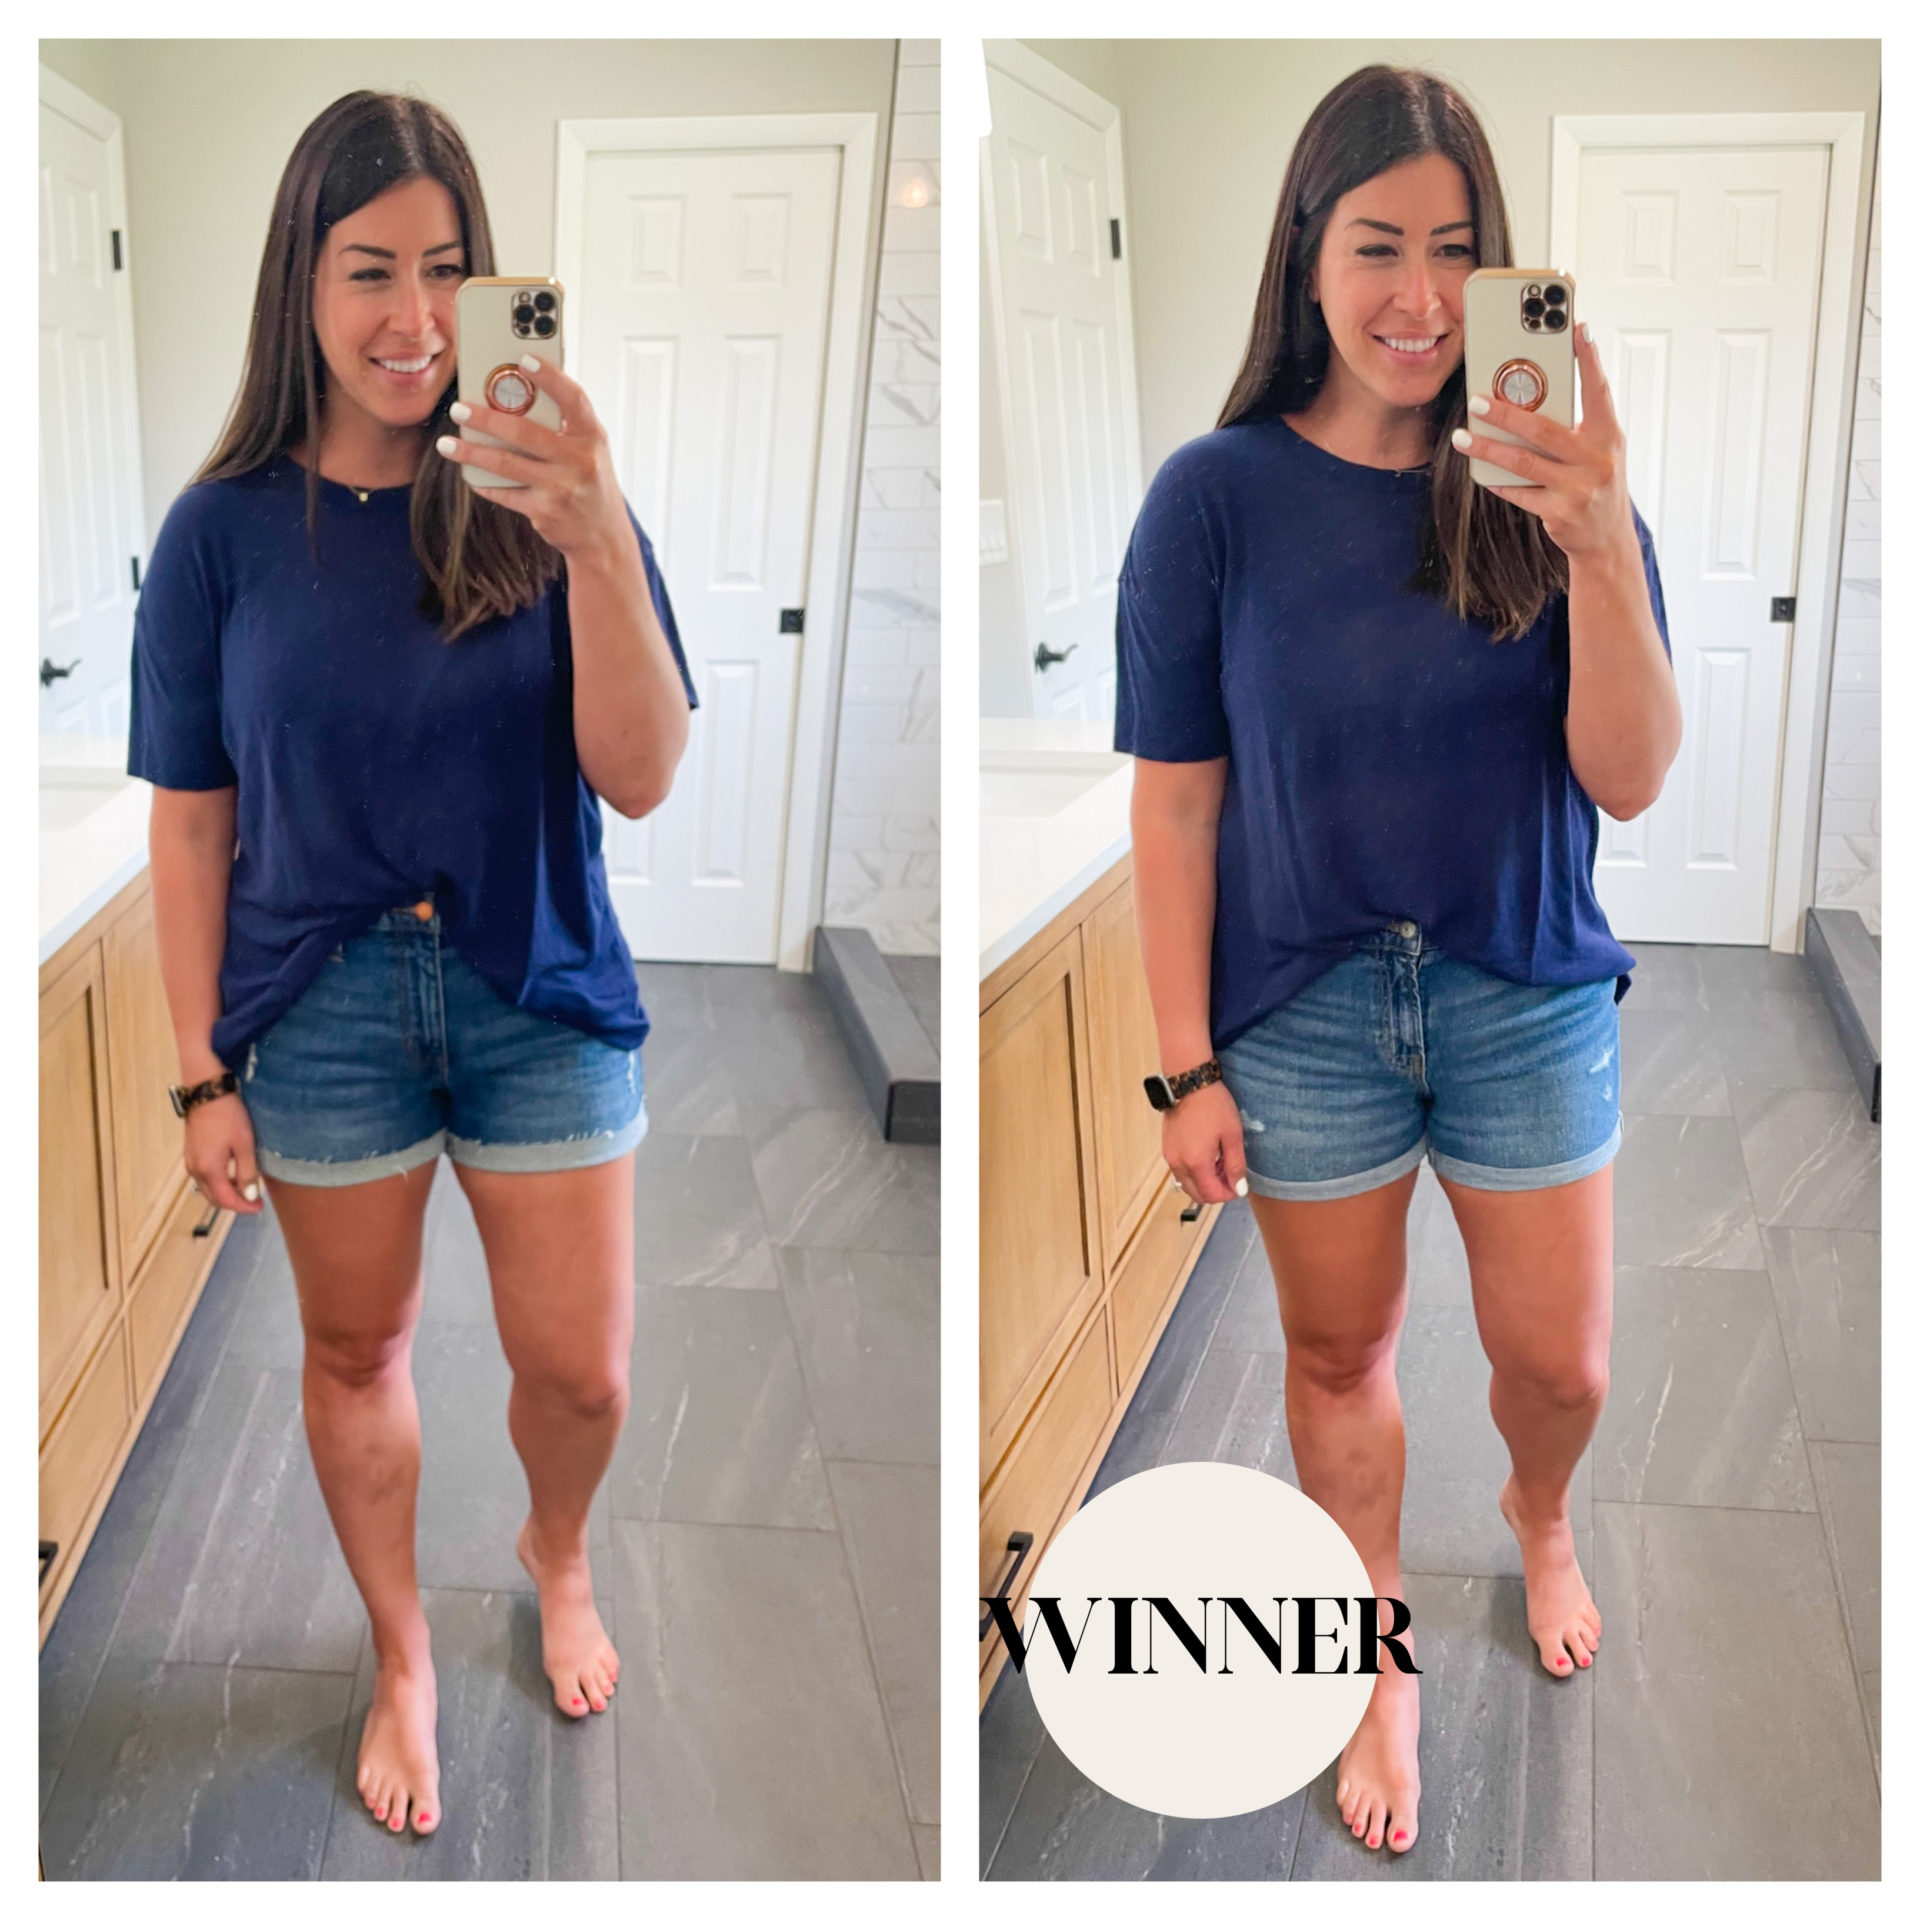 Denim Shorts Reviews - Stretchy, Comfy, and Affordable!